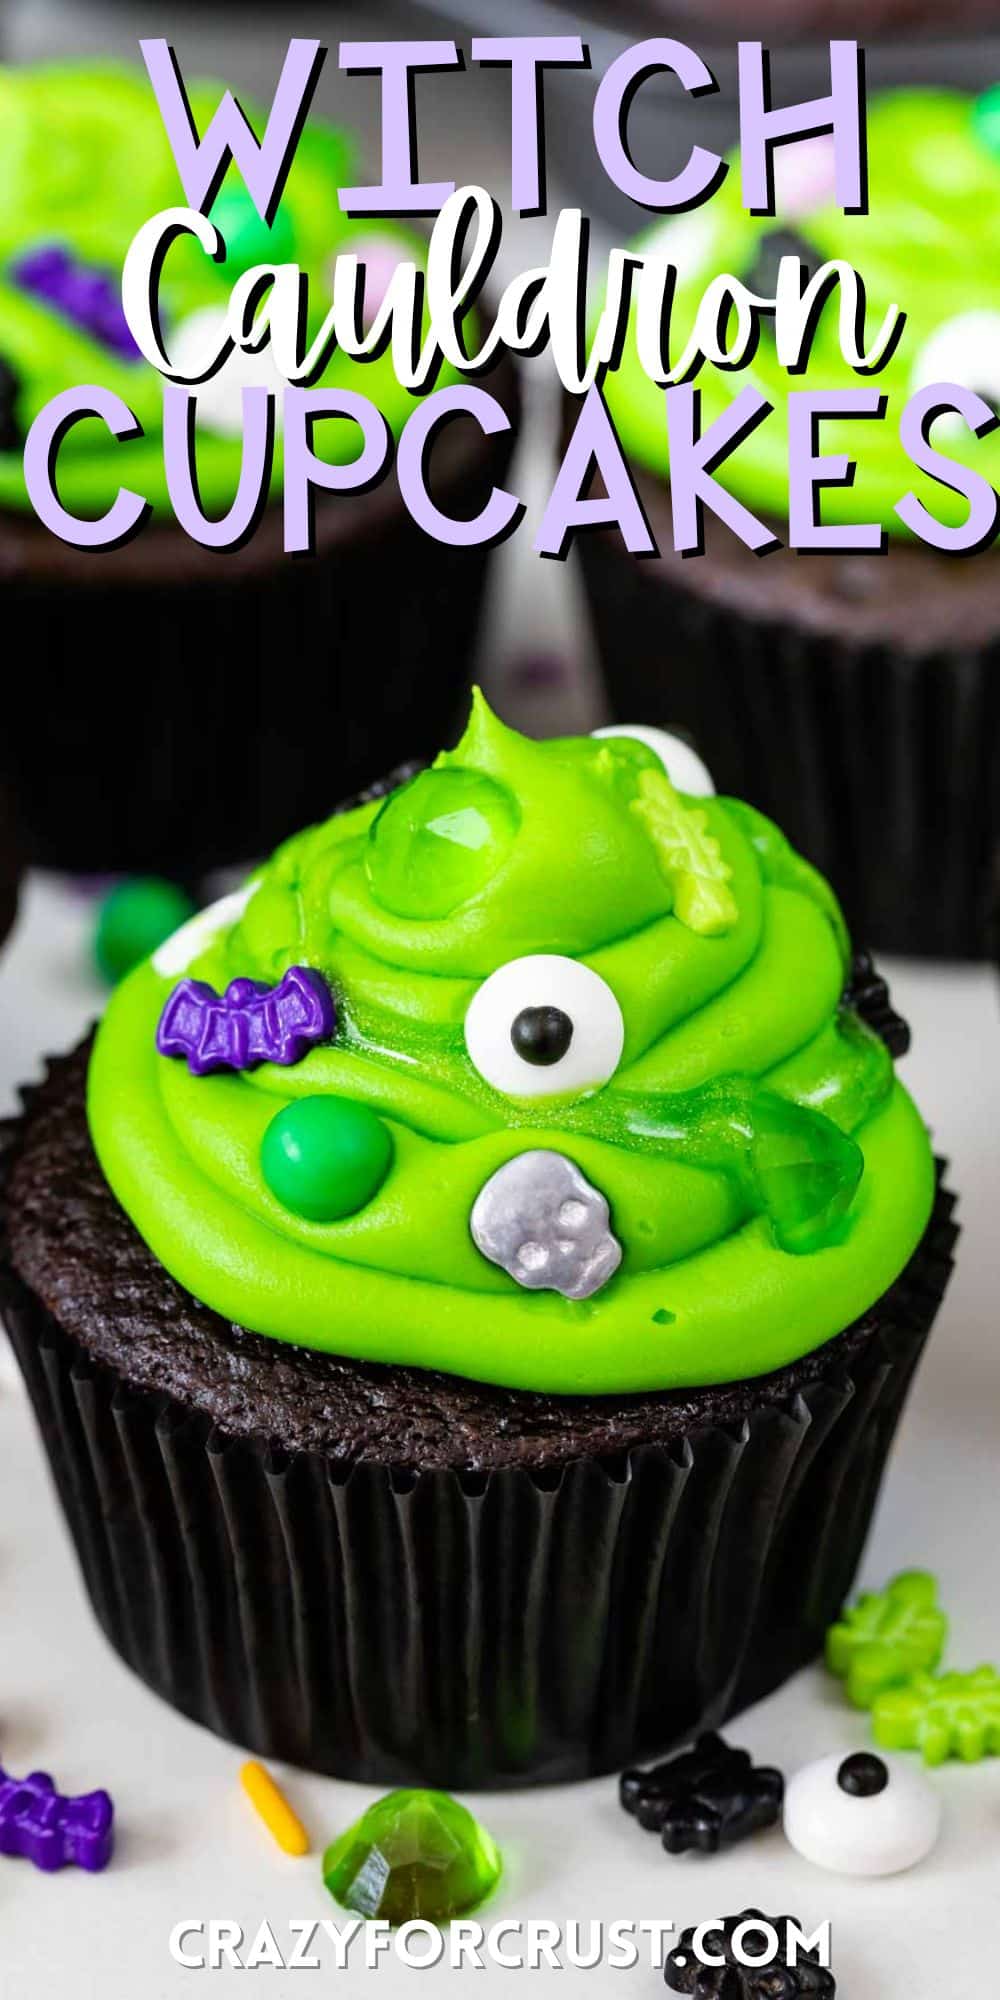 brown cupcake with bright green frosting and purple sprinkles with words on the image.